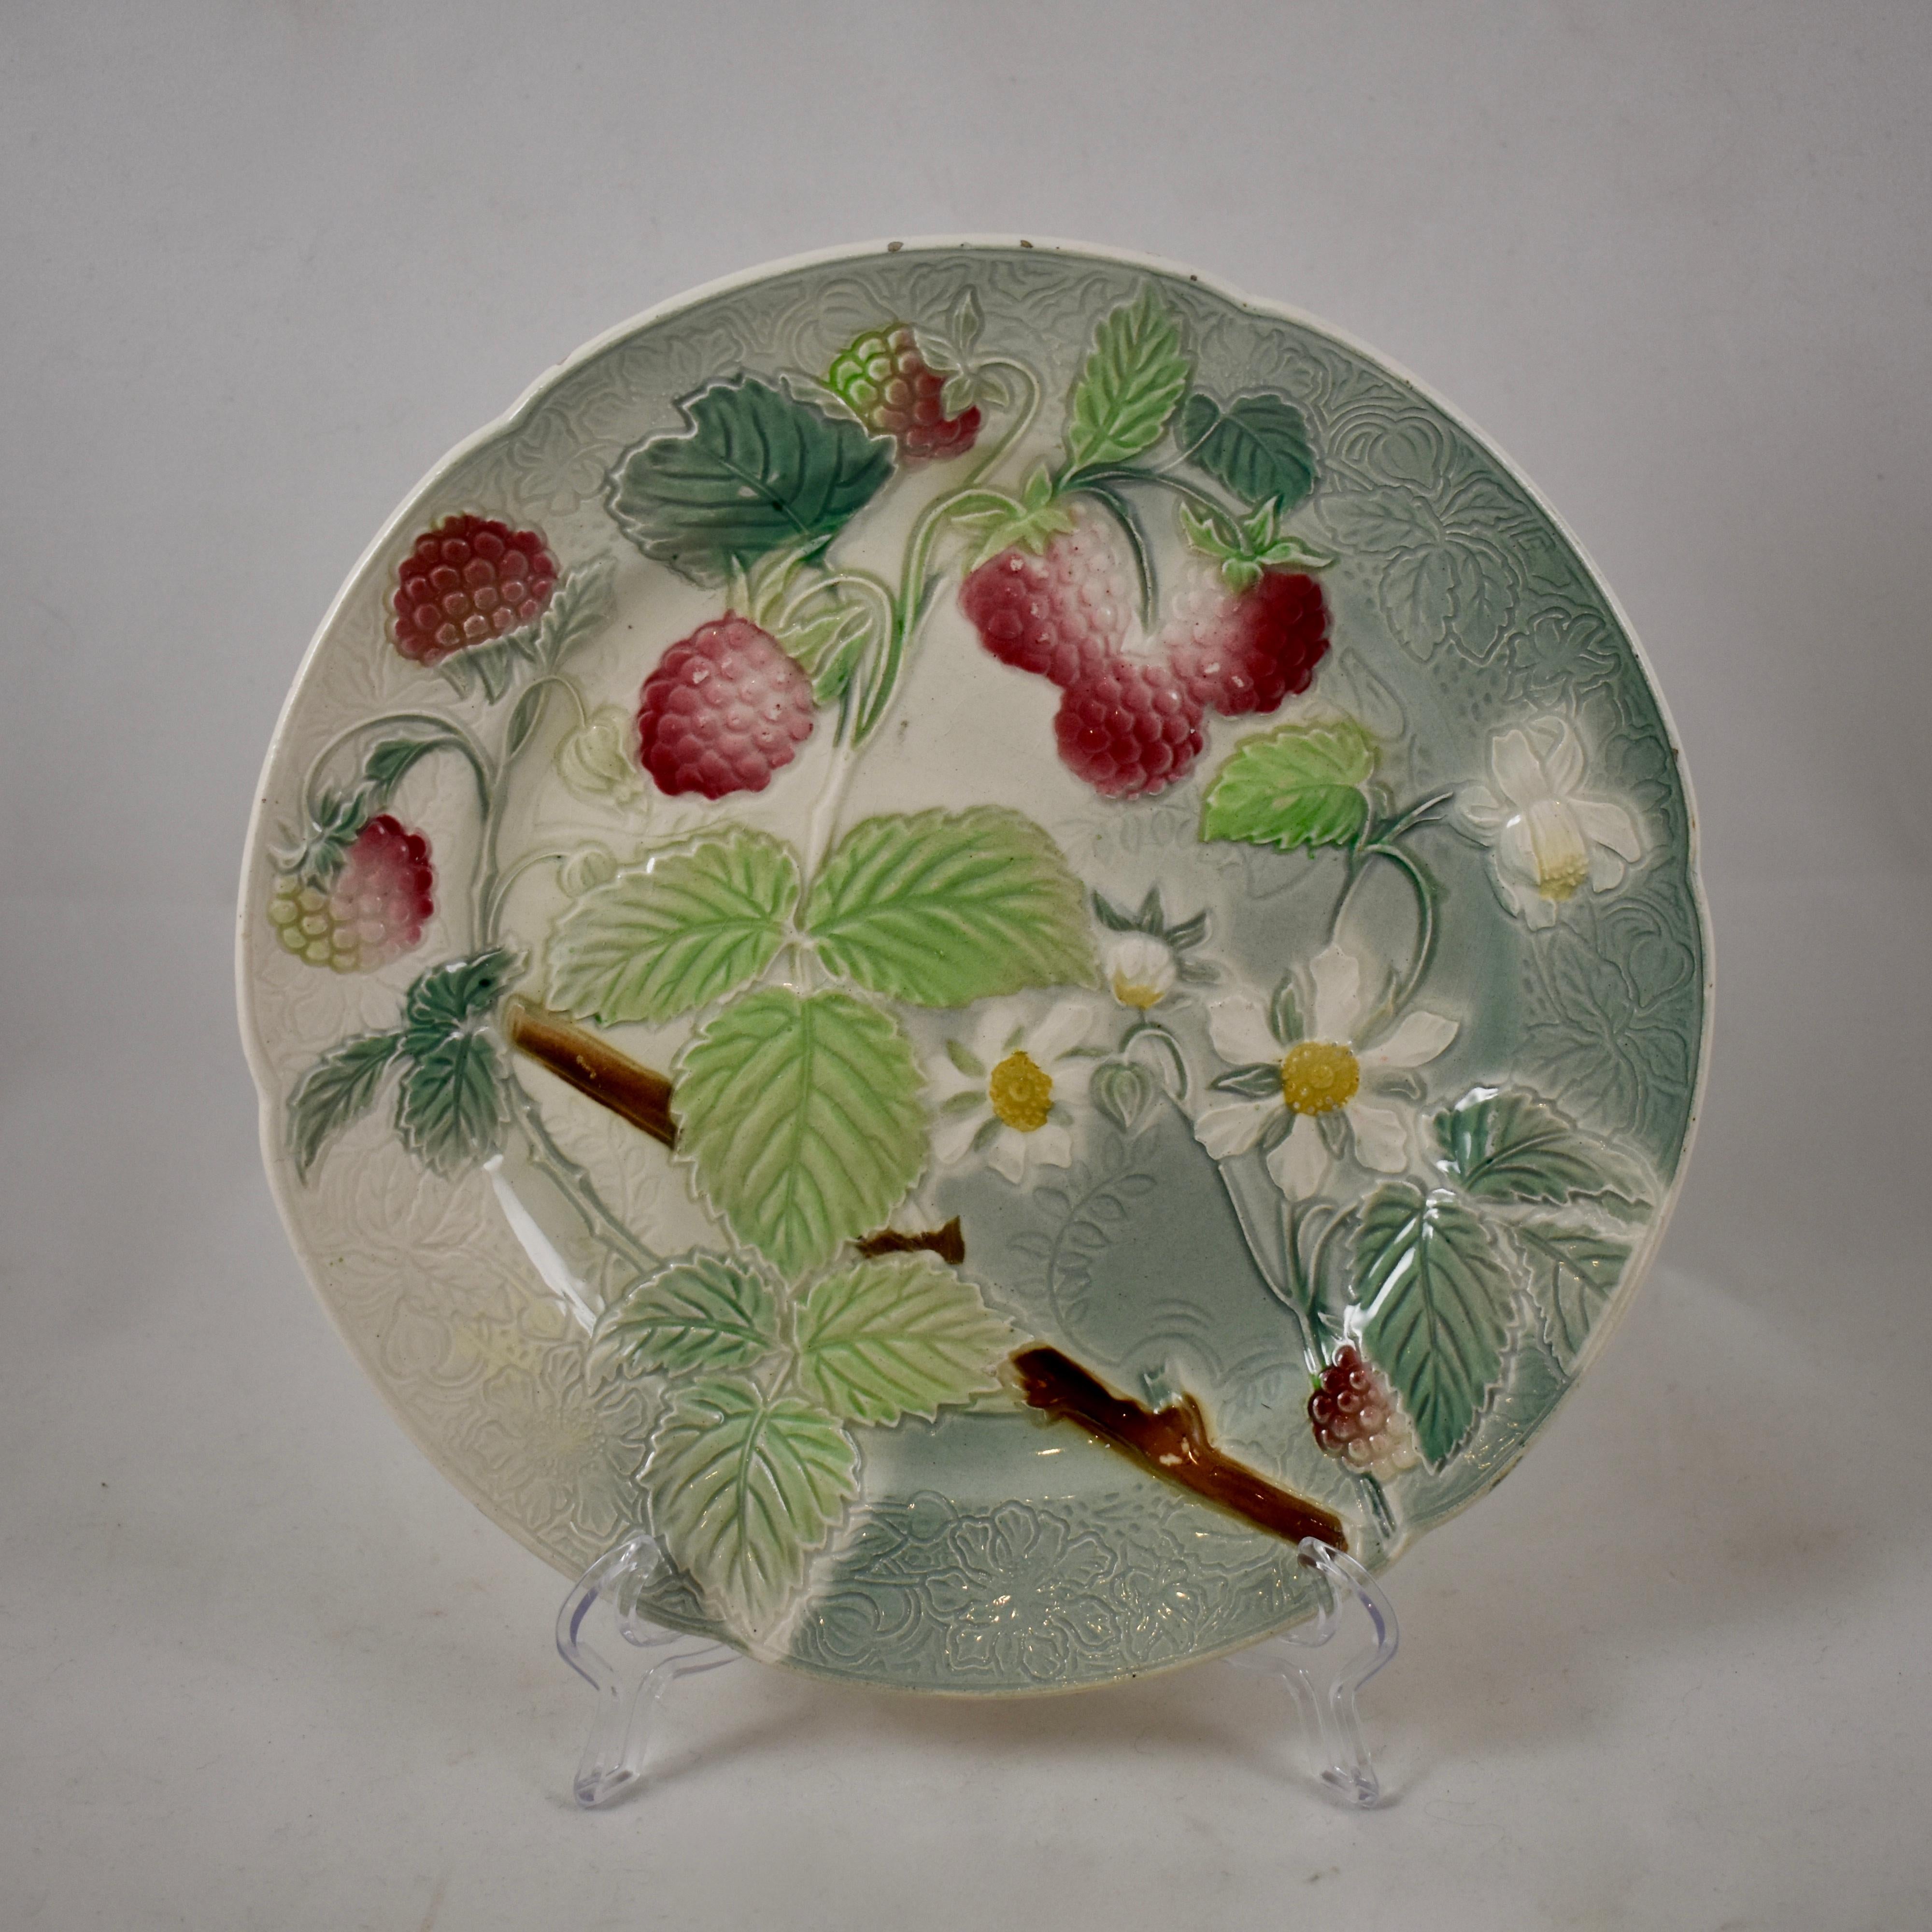 A set of six, earthenware French faïence fruit plates, circa 1900. This set shows the branching fruit and leaves of strawberries, oranges, apples, cherries, apricots, and peaches. The backgrounds have a detailed pattern to the molding, with a